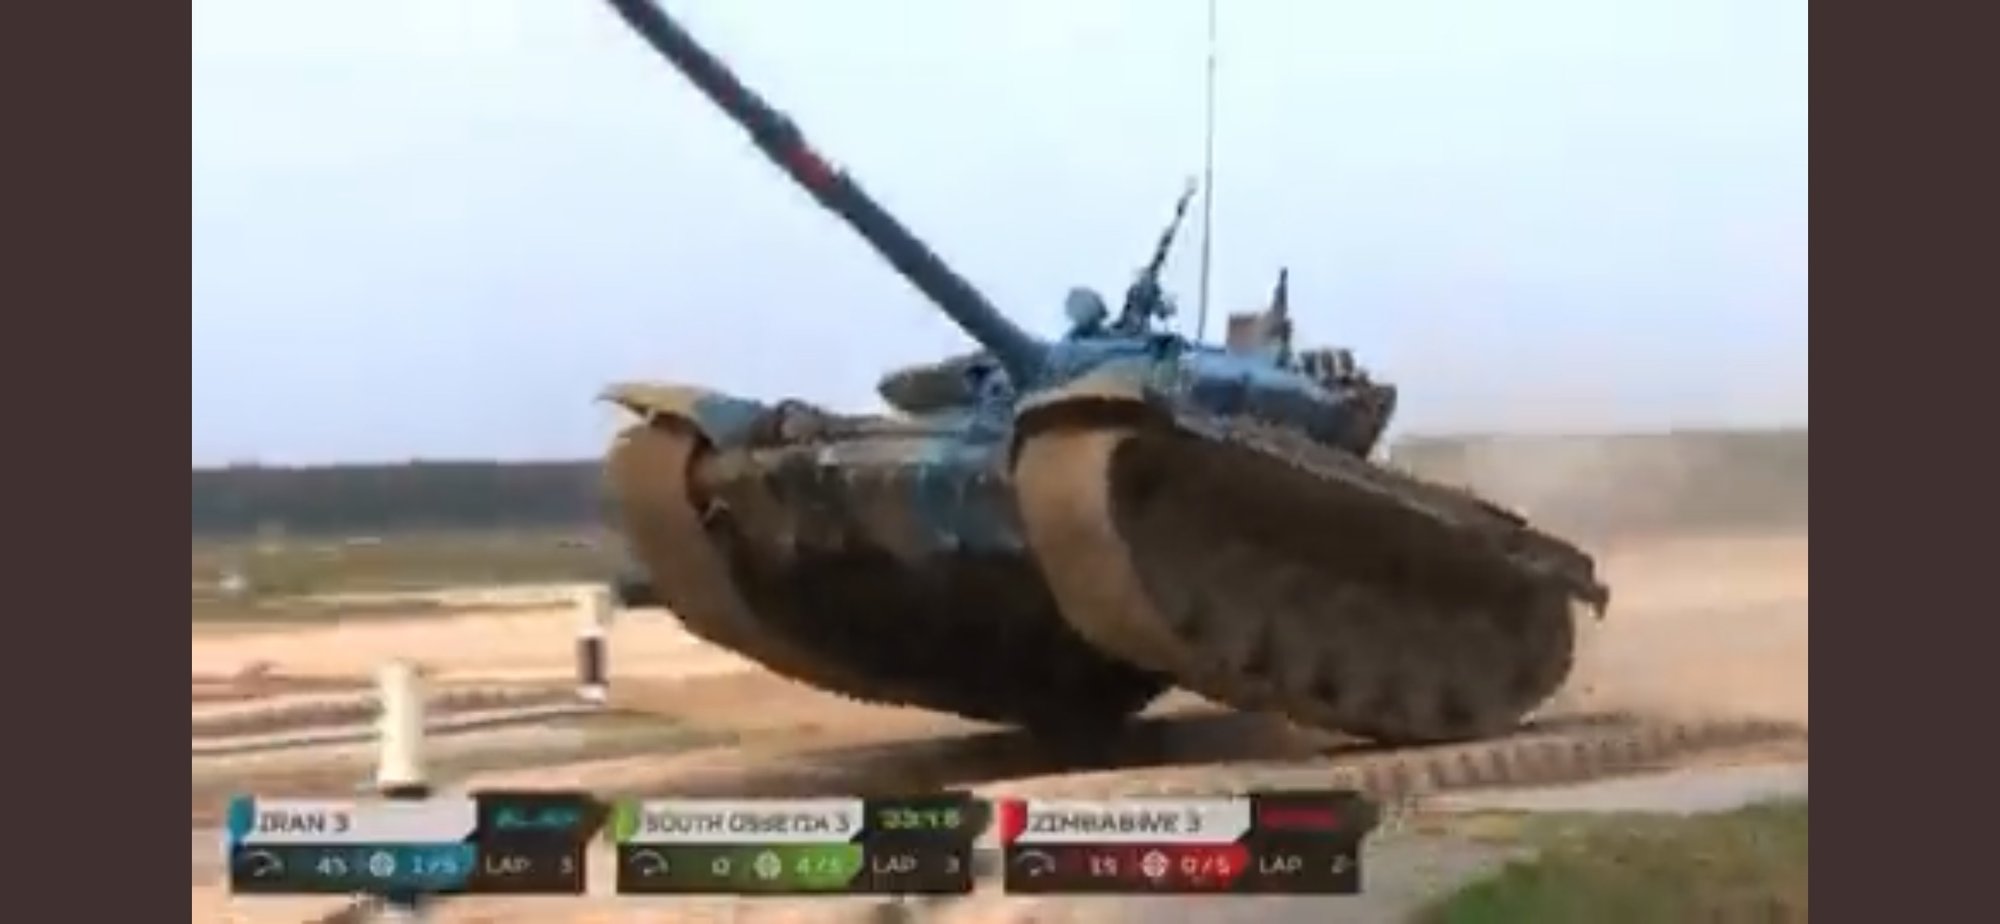 Iranian tank launches over obstacle at the 2022 International Army Games Tank Biathlon.